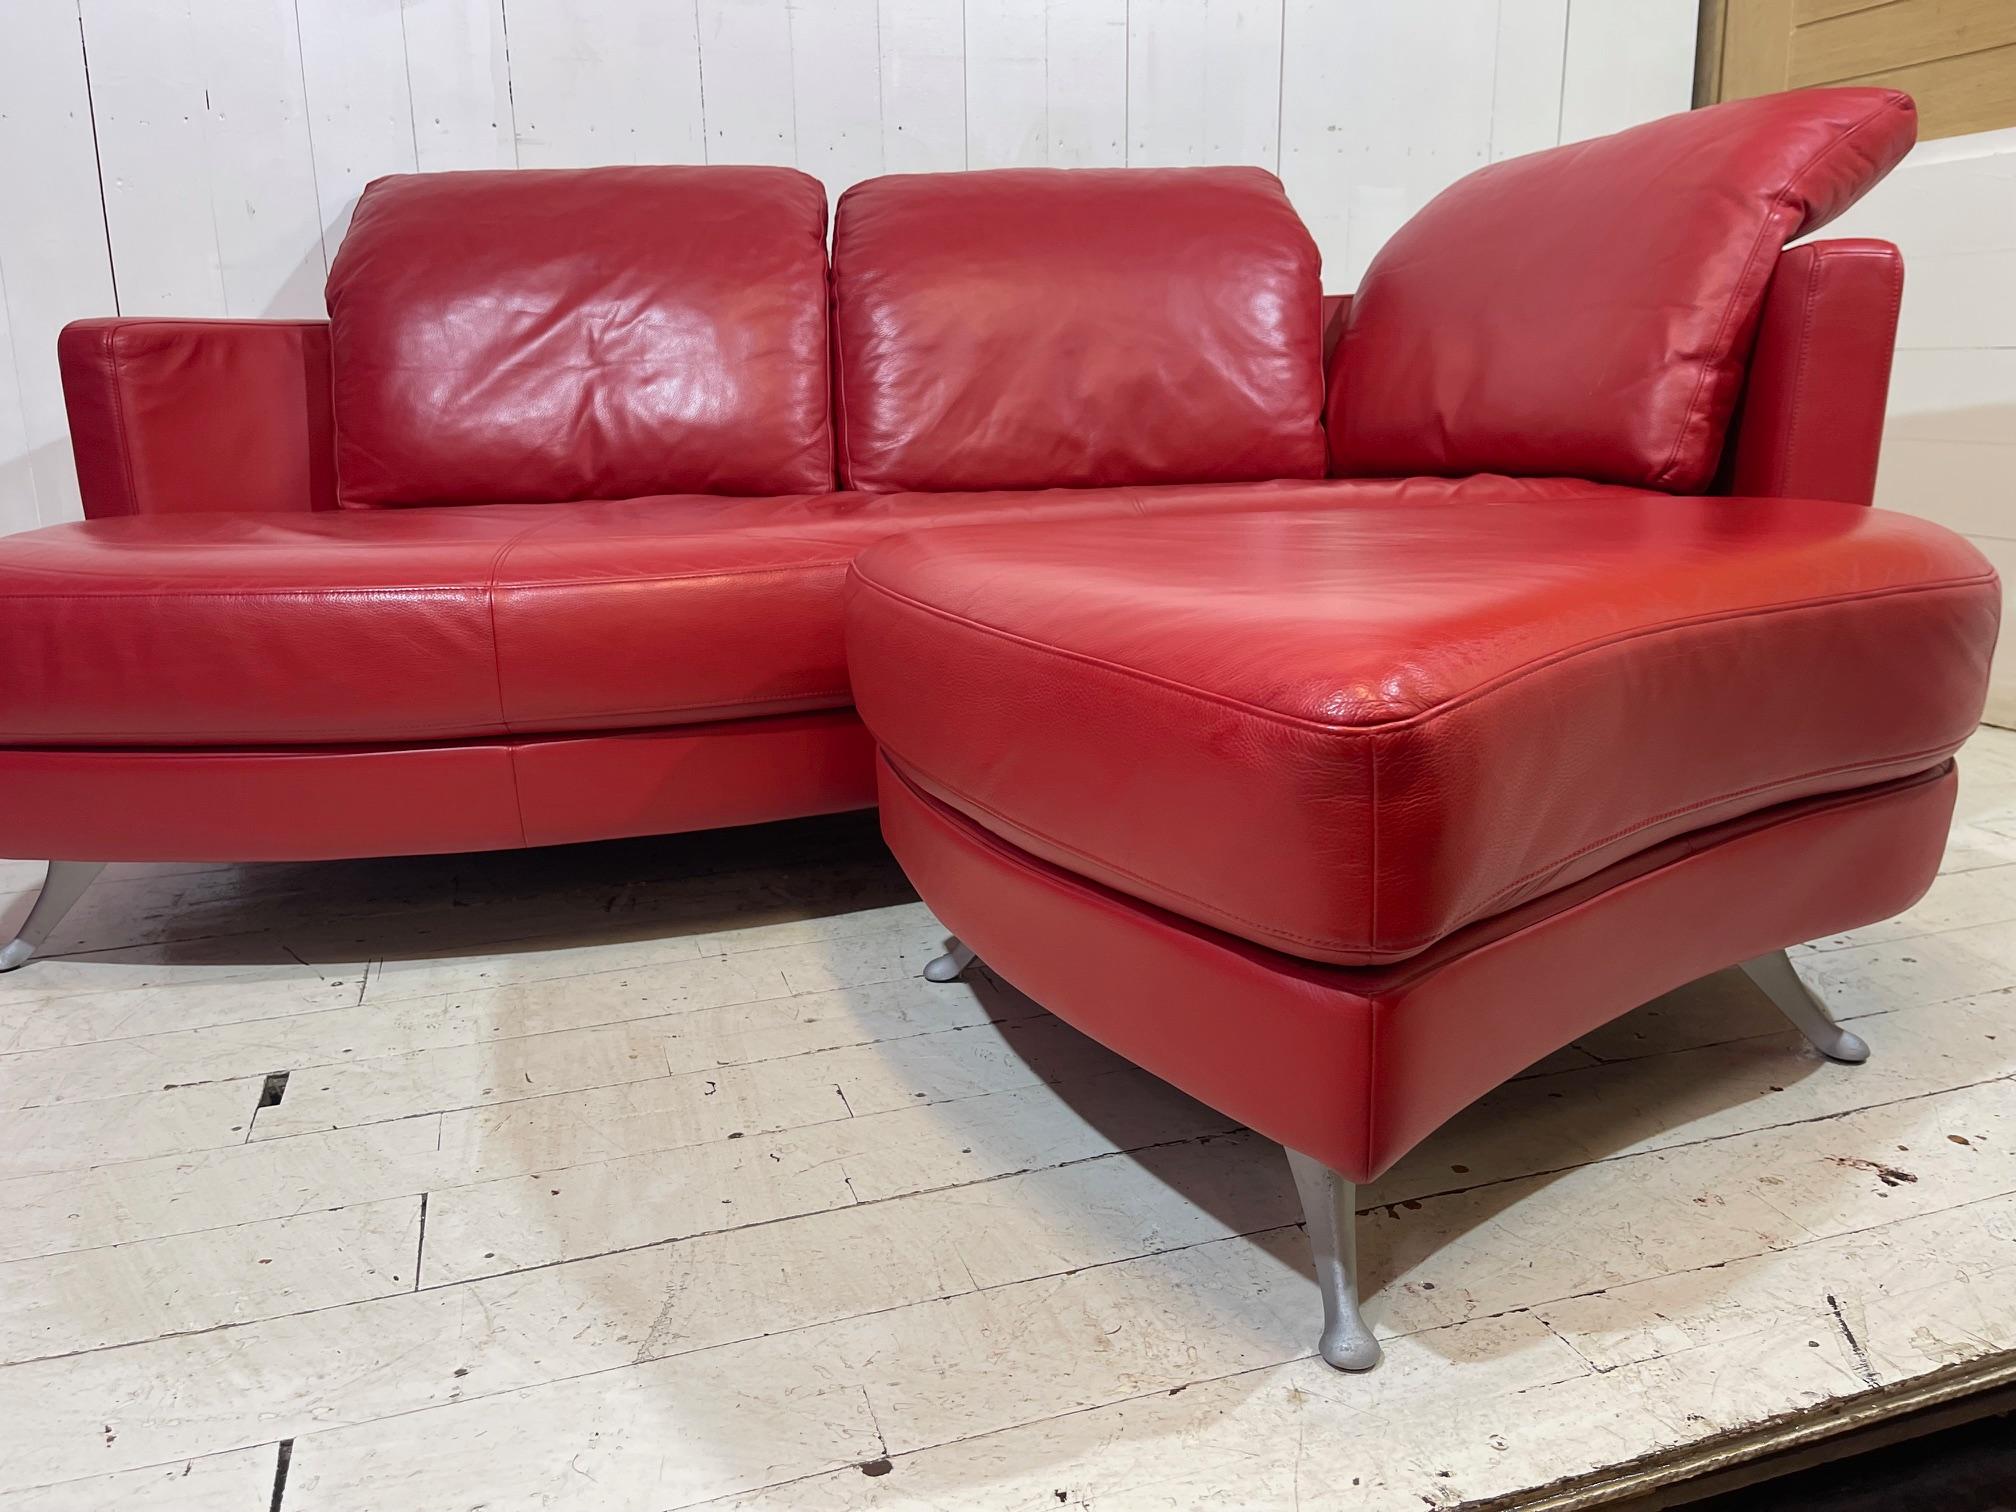 Anodized Contemporary Limited Edition Red Leather Sofa and Footstool Set by Rolf Benz For Sale